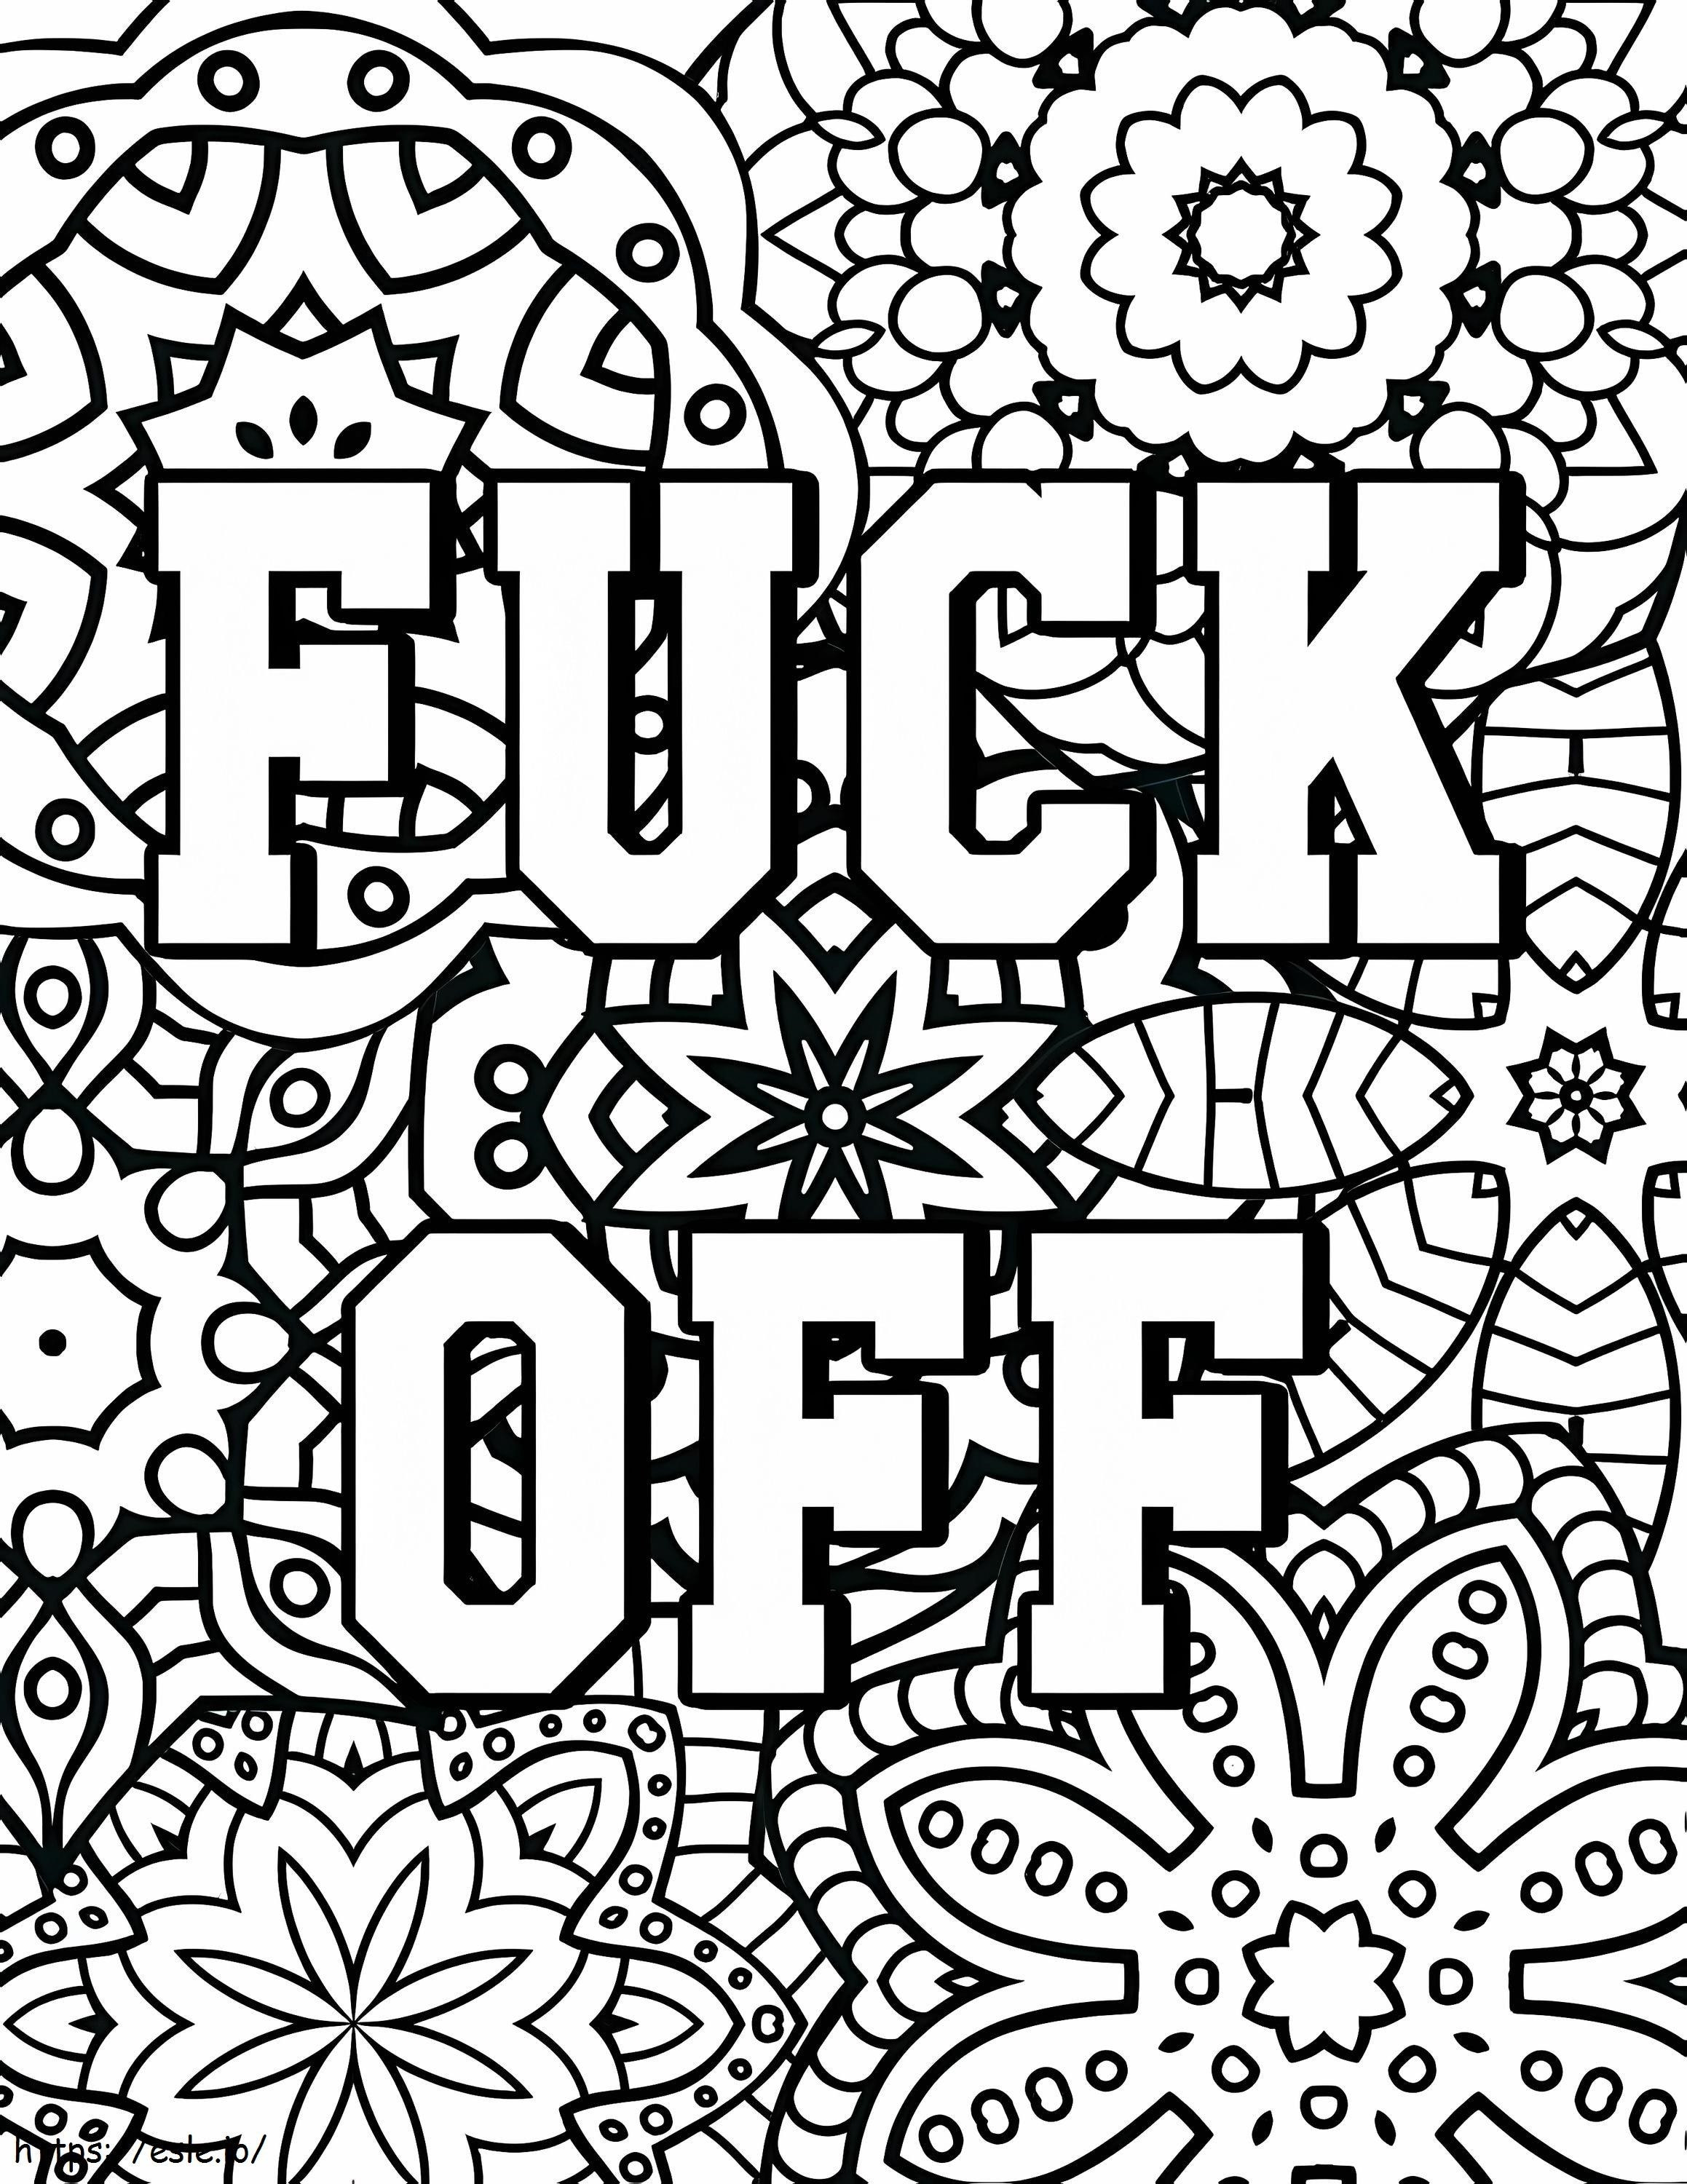 Fuck Off coloring page